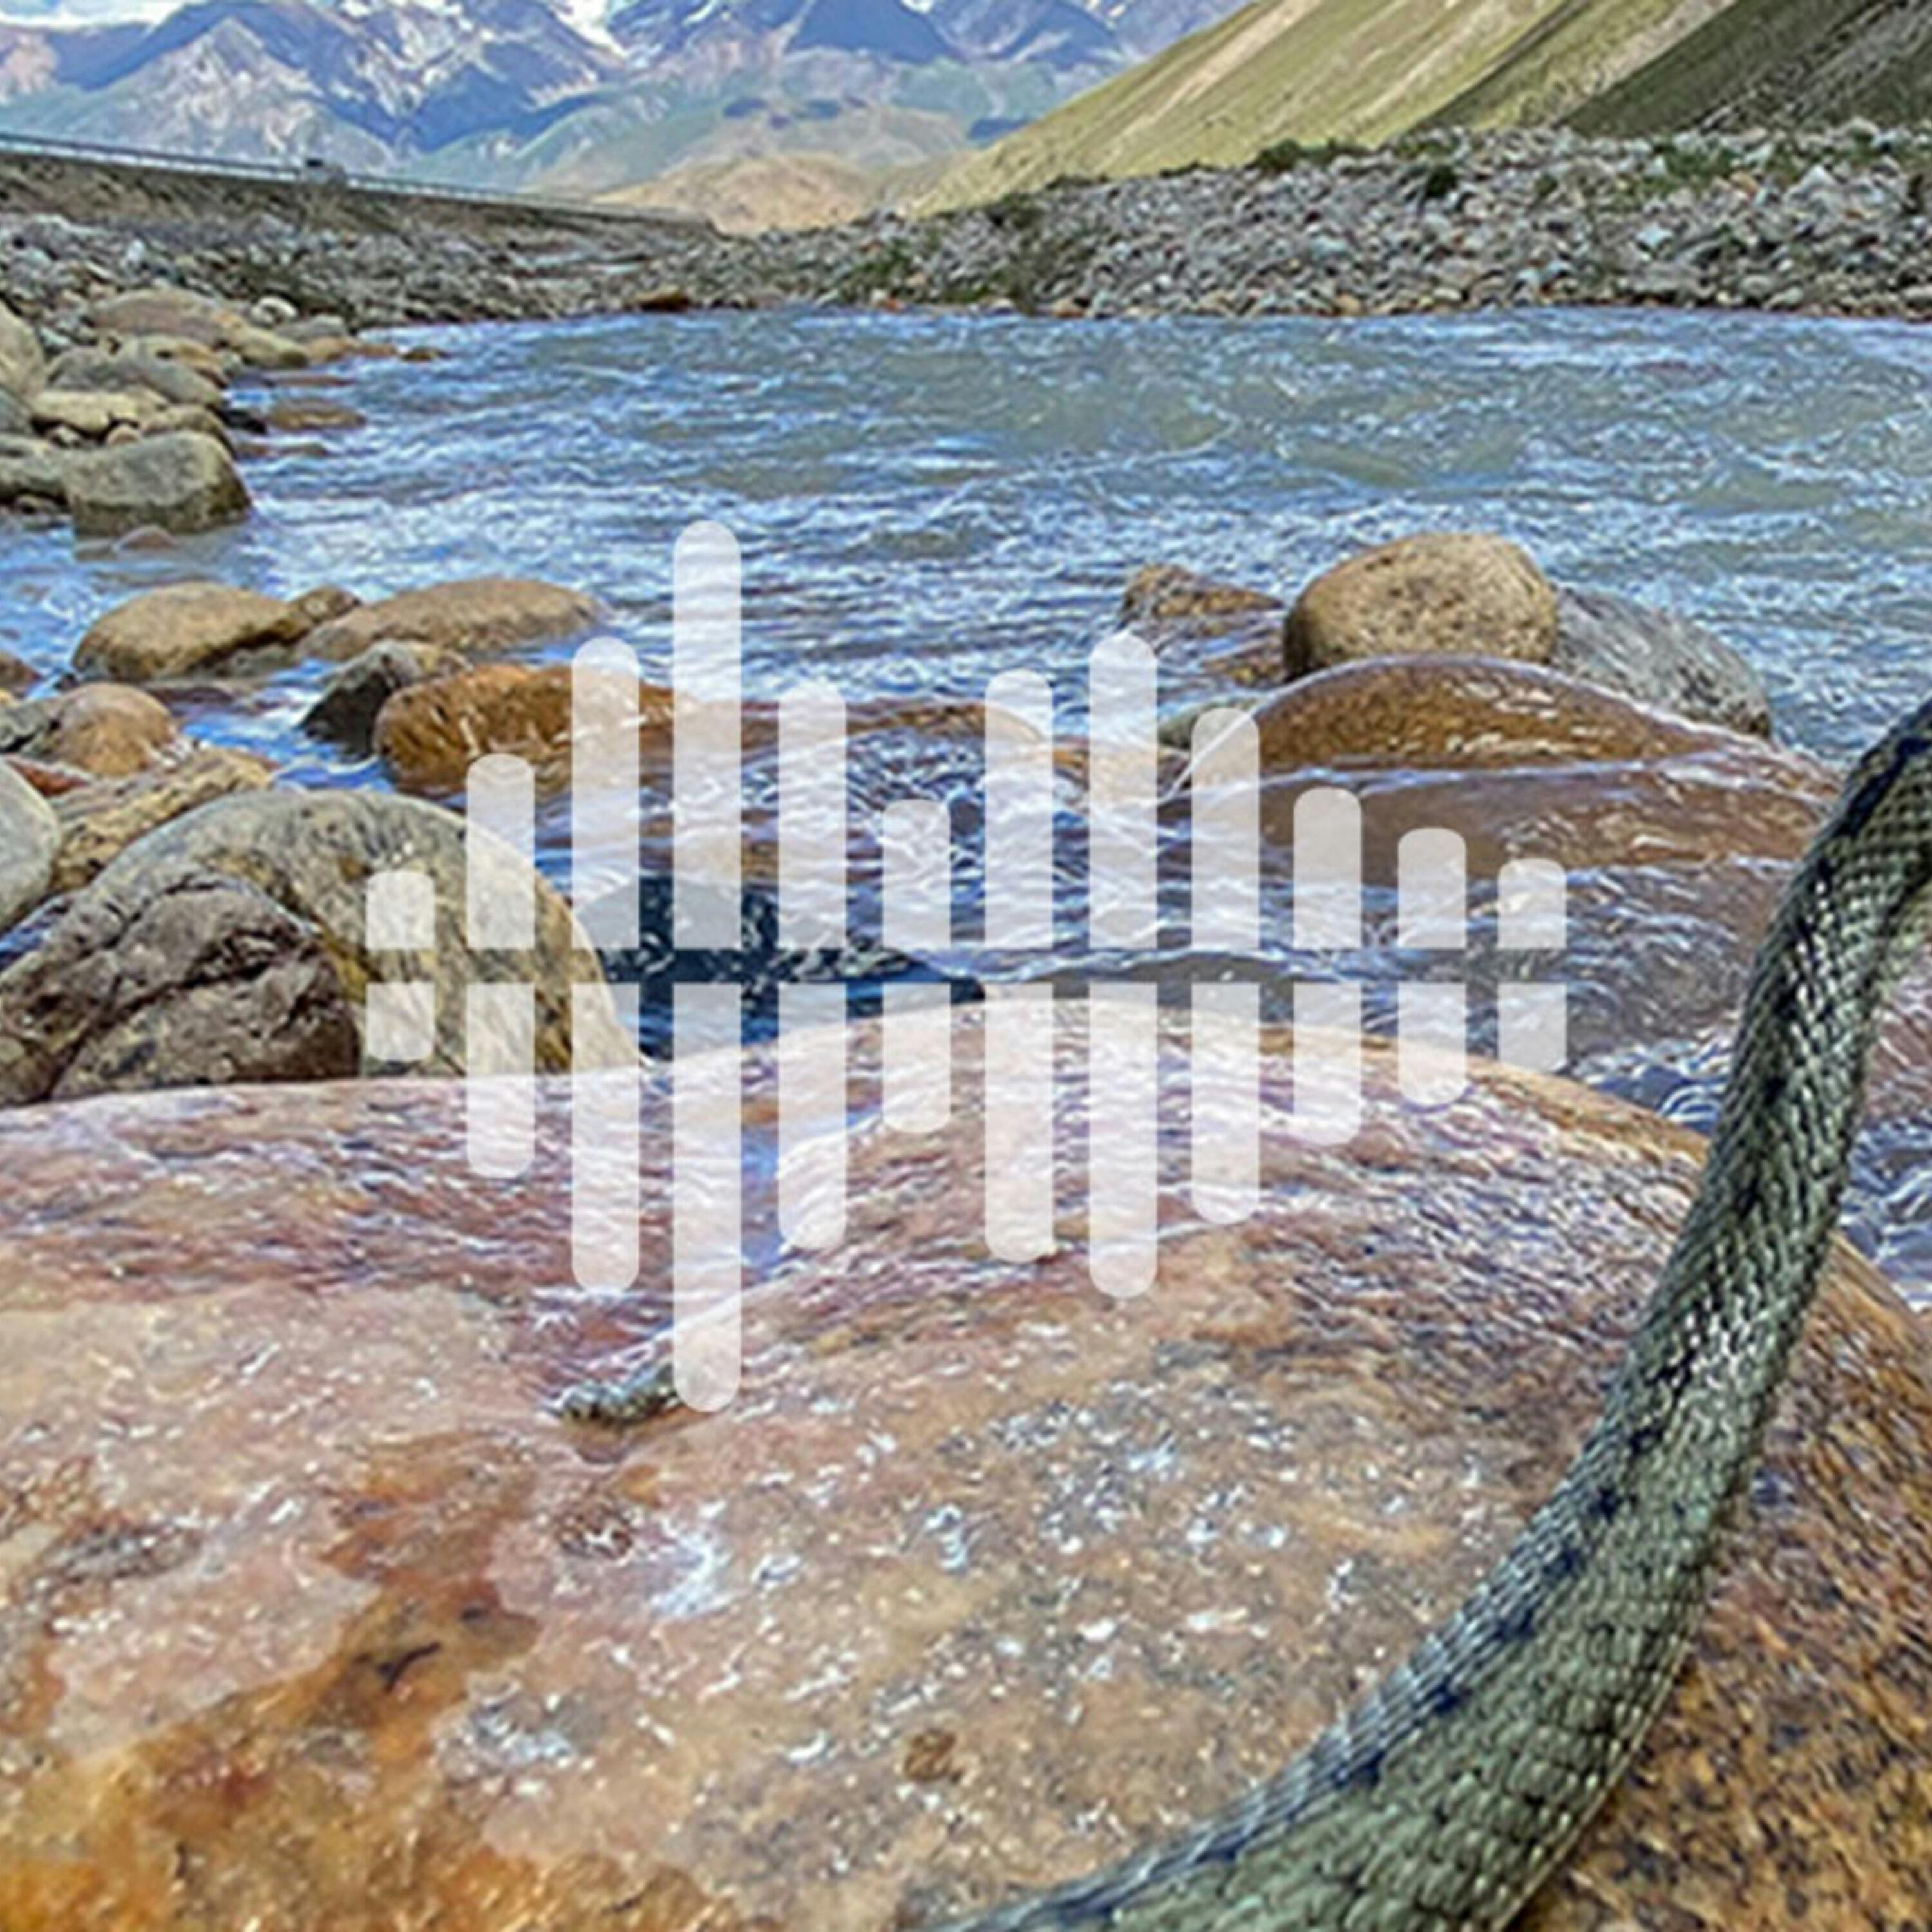 Snakes living the high-altitude life, and sending computing power to the edges of the internet